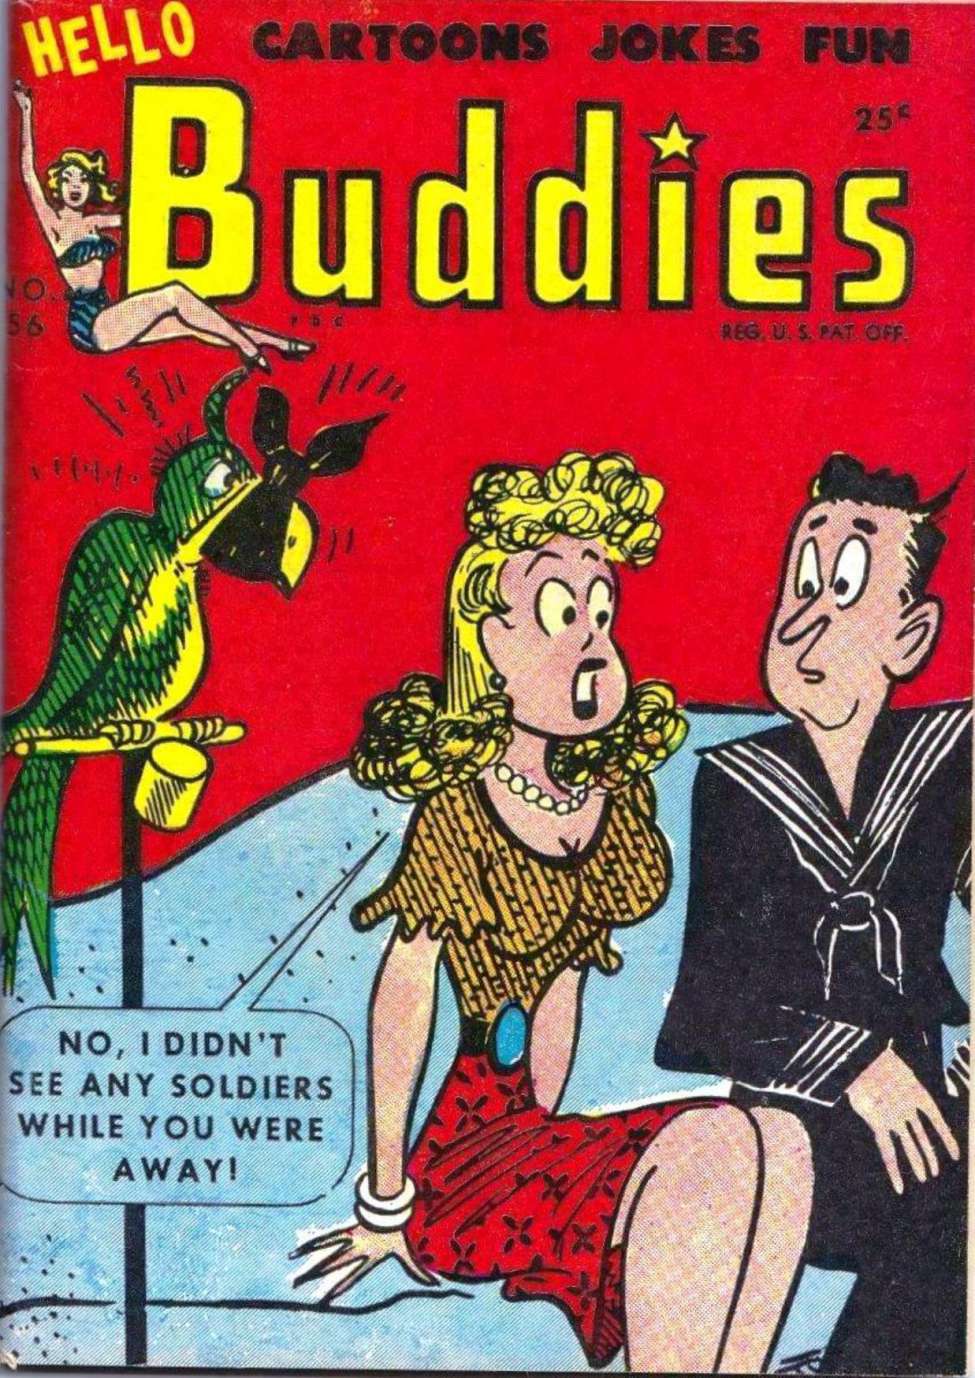 Book Cover For Hello Buddies 56